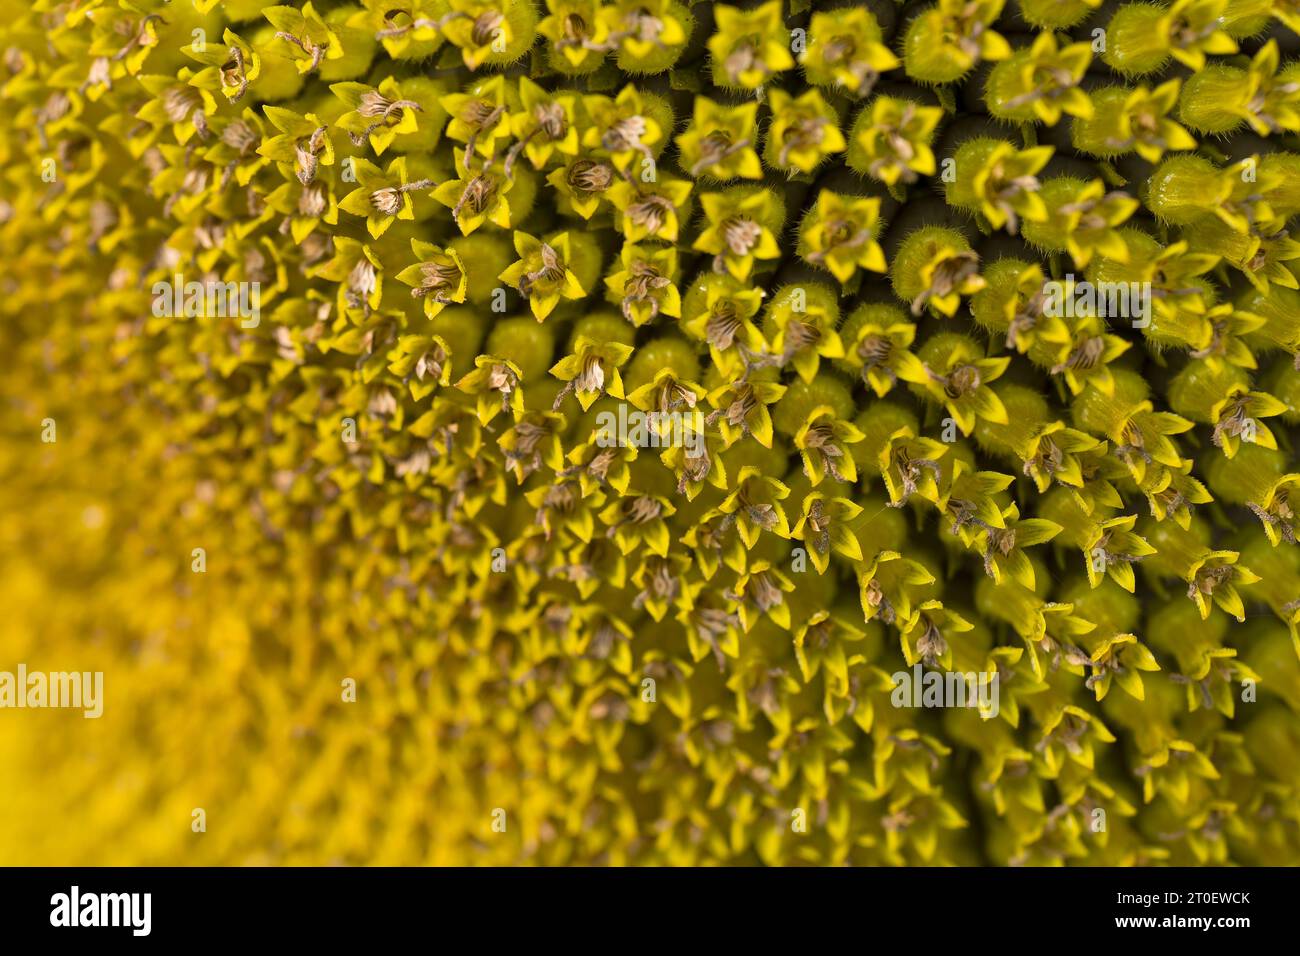 Close-up of a sunflower (Helianthus annuus) flower, flower basket with tubular flowers, Germany Stock Photo